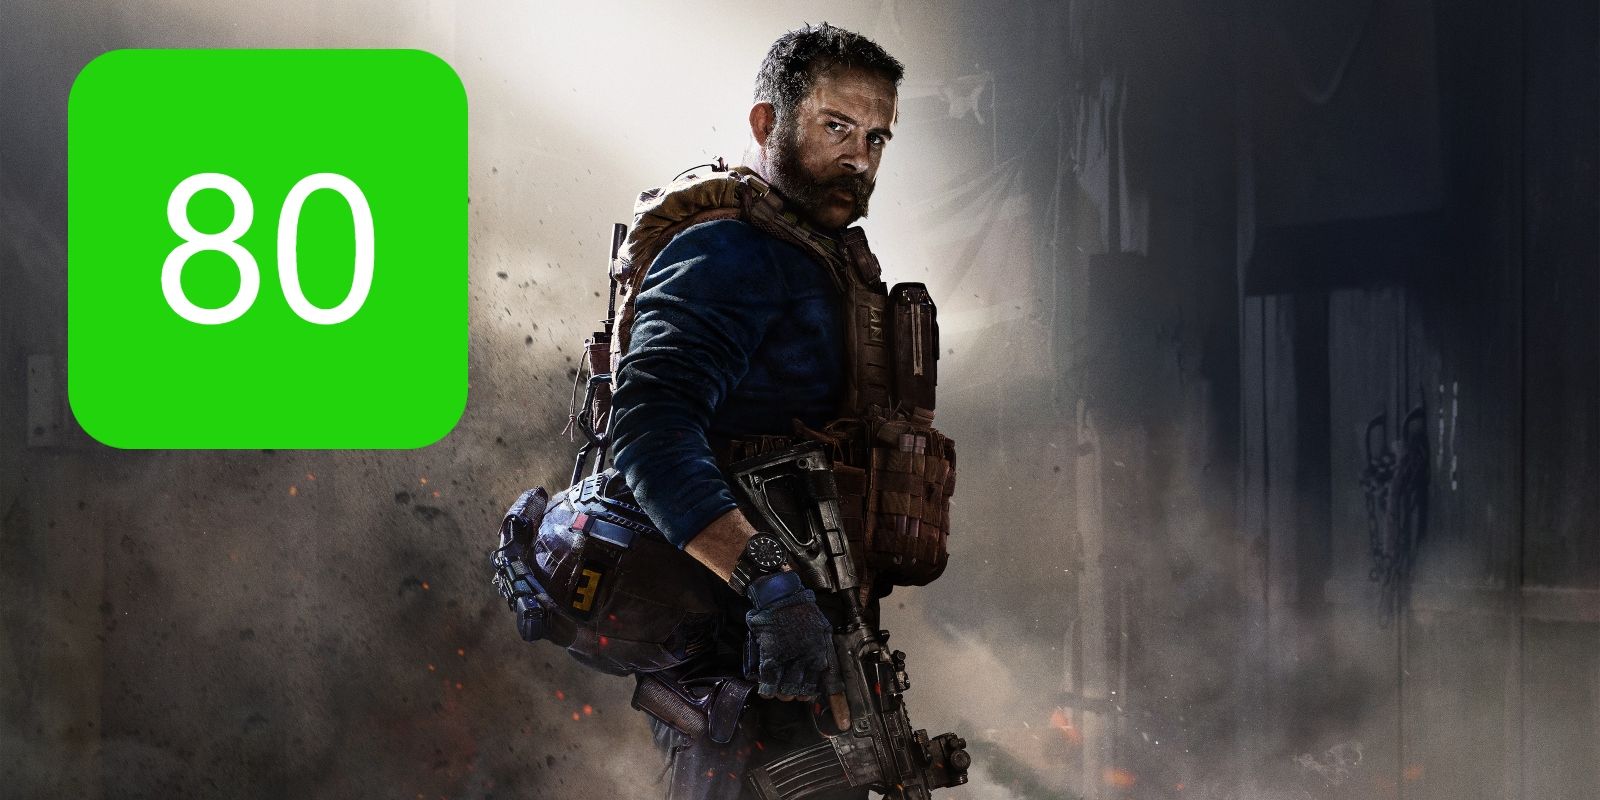 The Xbox One and PS4 Metascore for CoD Modern Warfare featuring a young captain price.